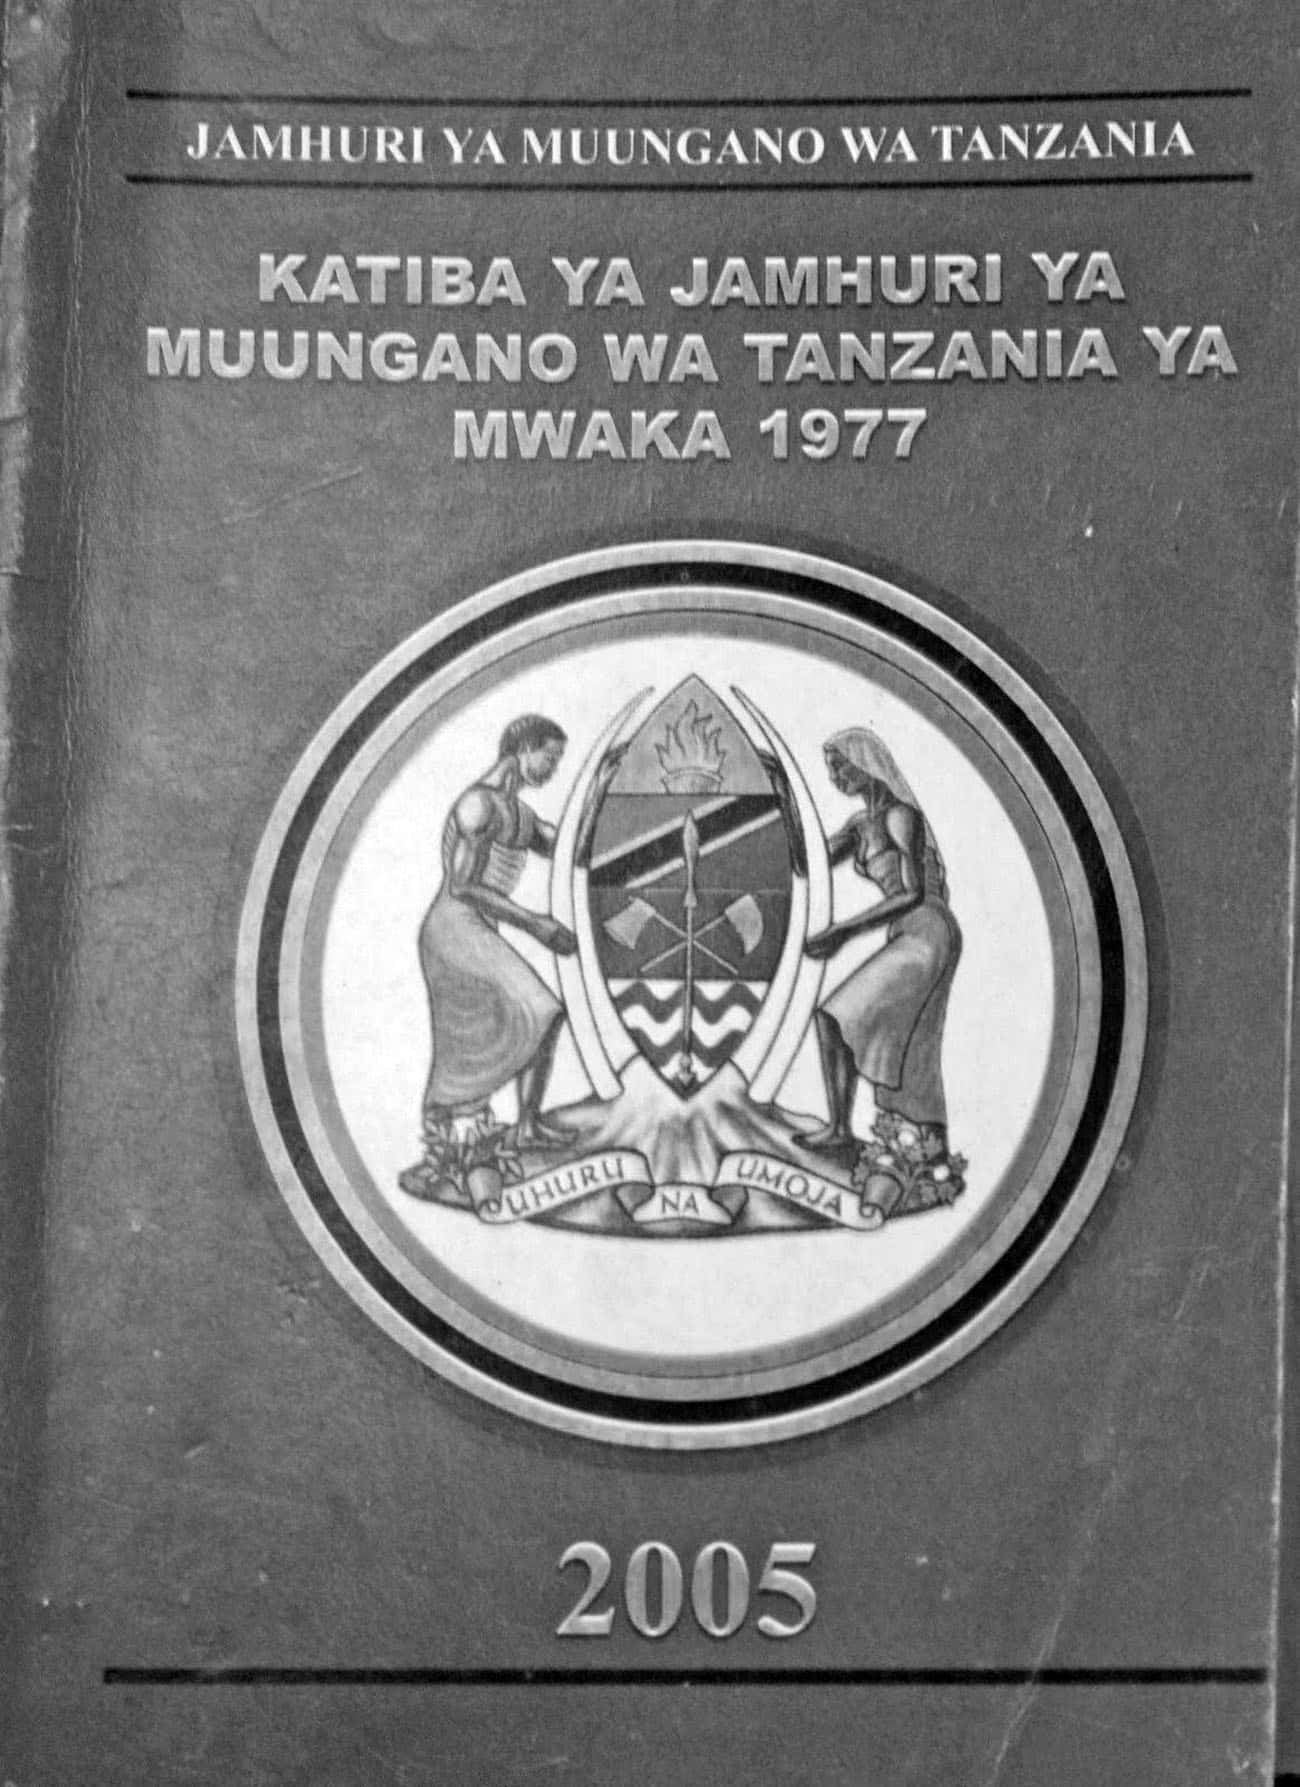 Constitution of Tanzania – Quick Overview and History